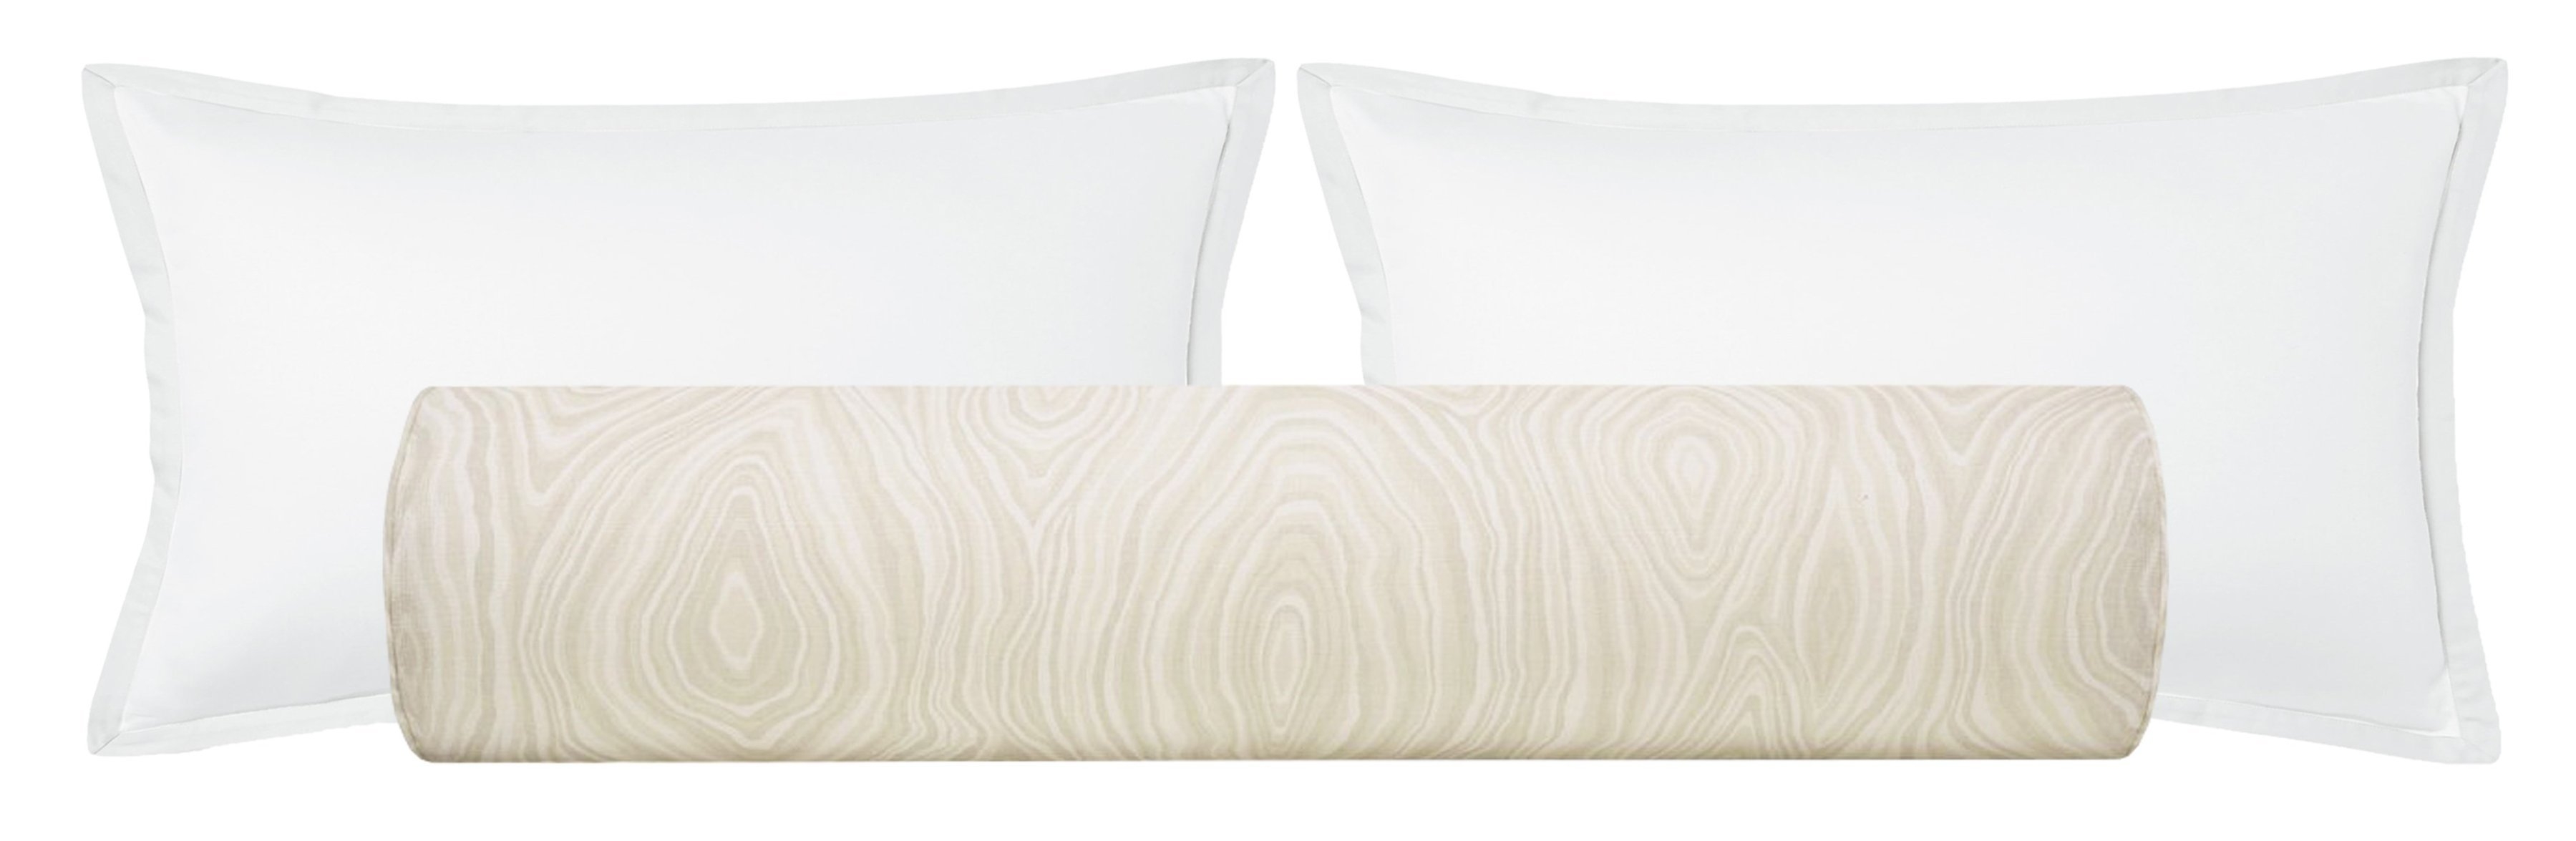 THE BOLSTER :: AGATE LINEN PRINT // NATURAL - KING // 9" X 48" - Image 0